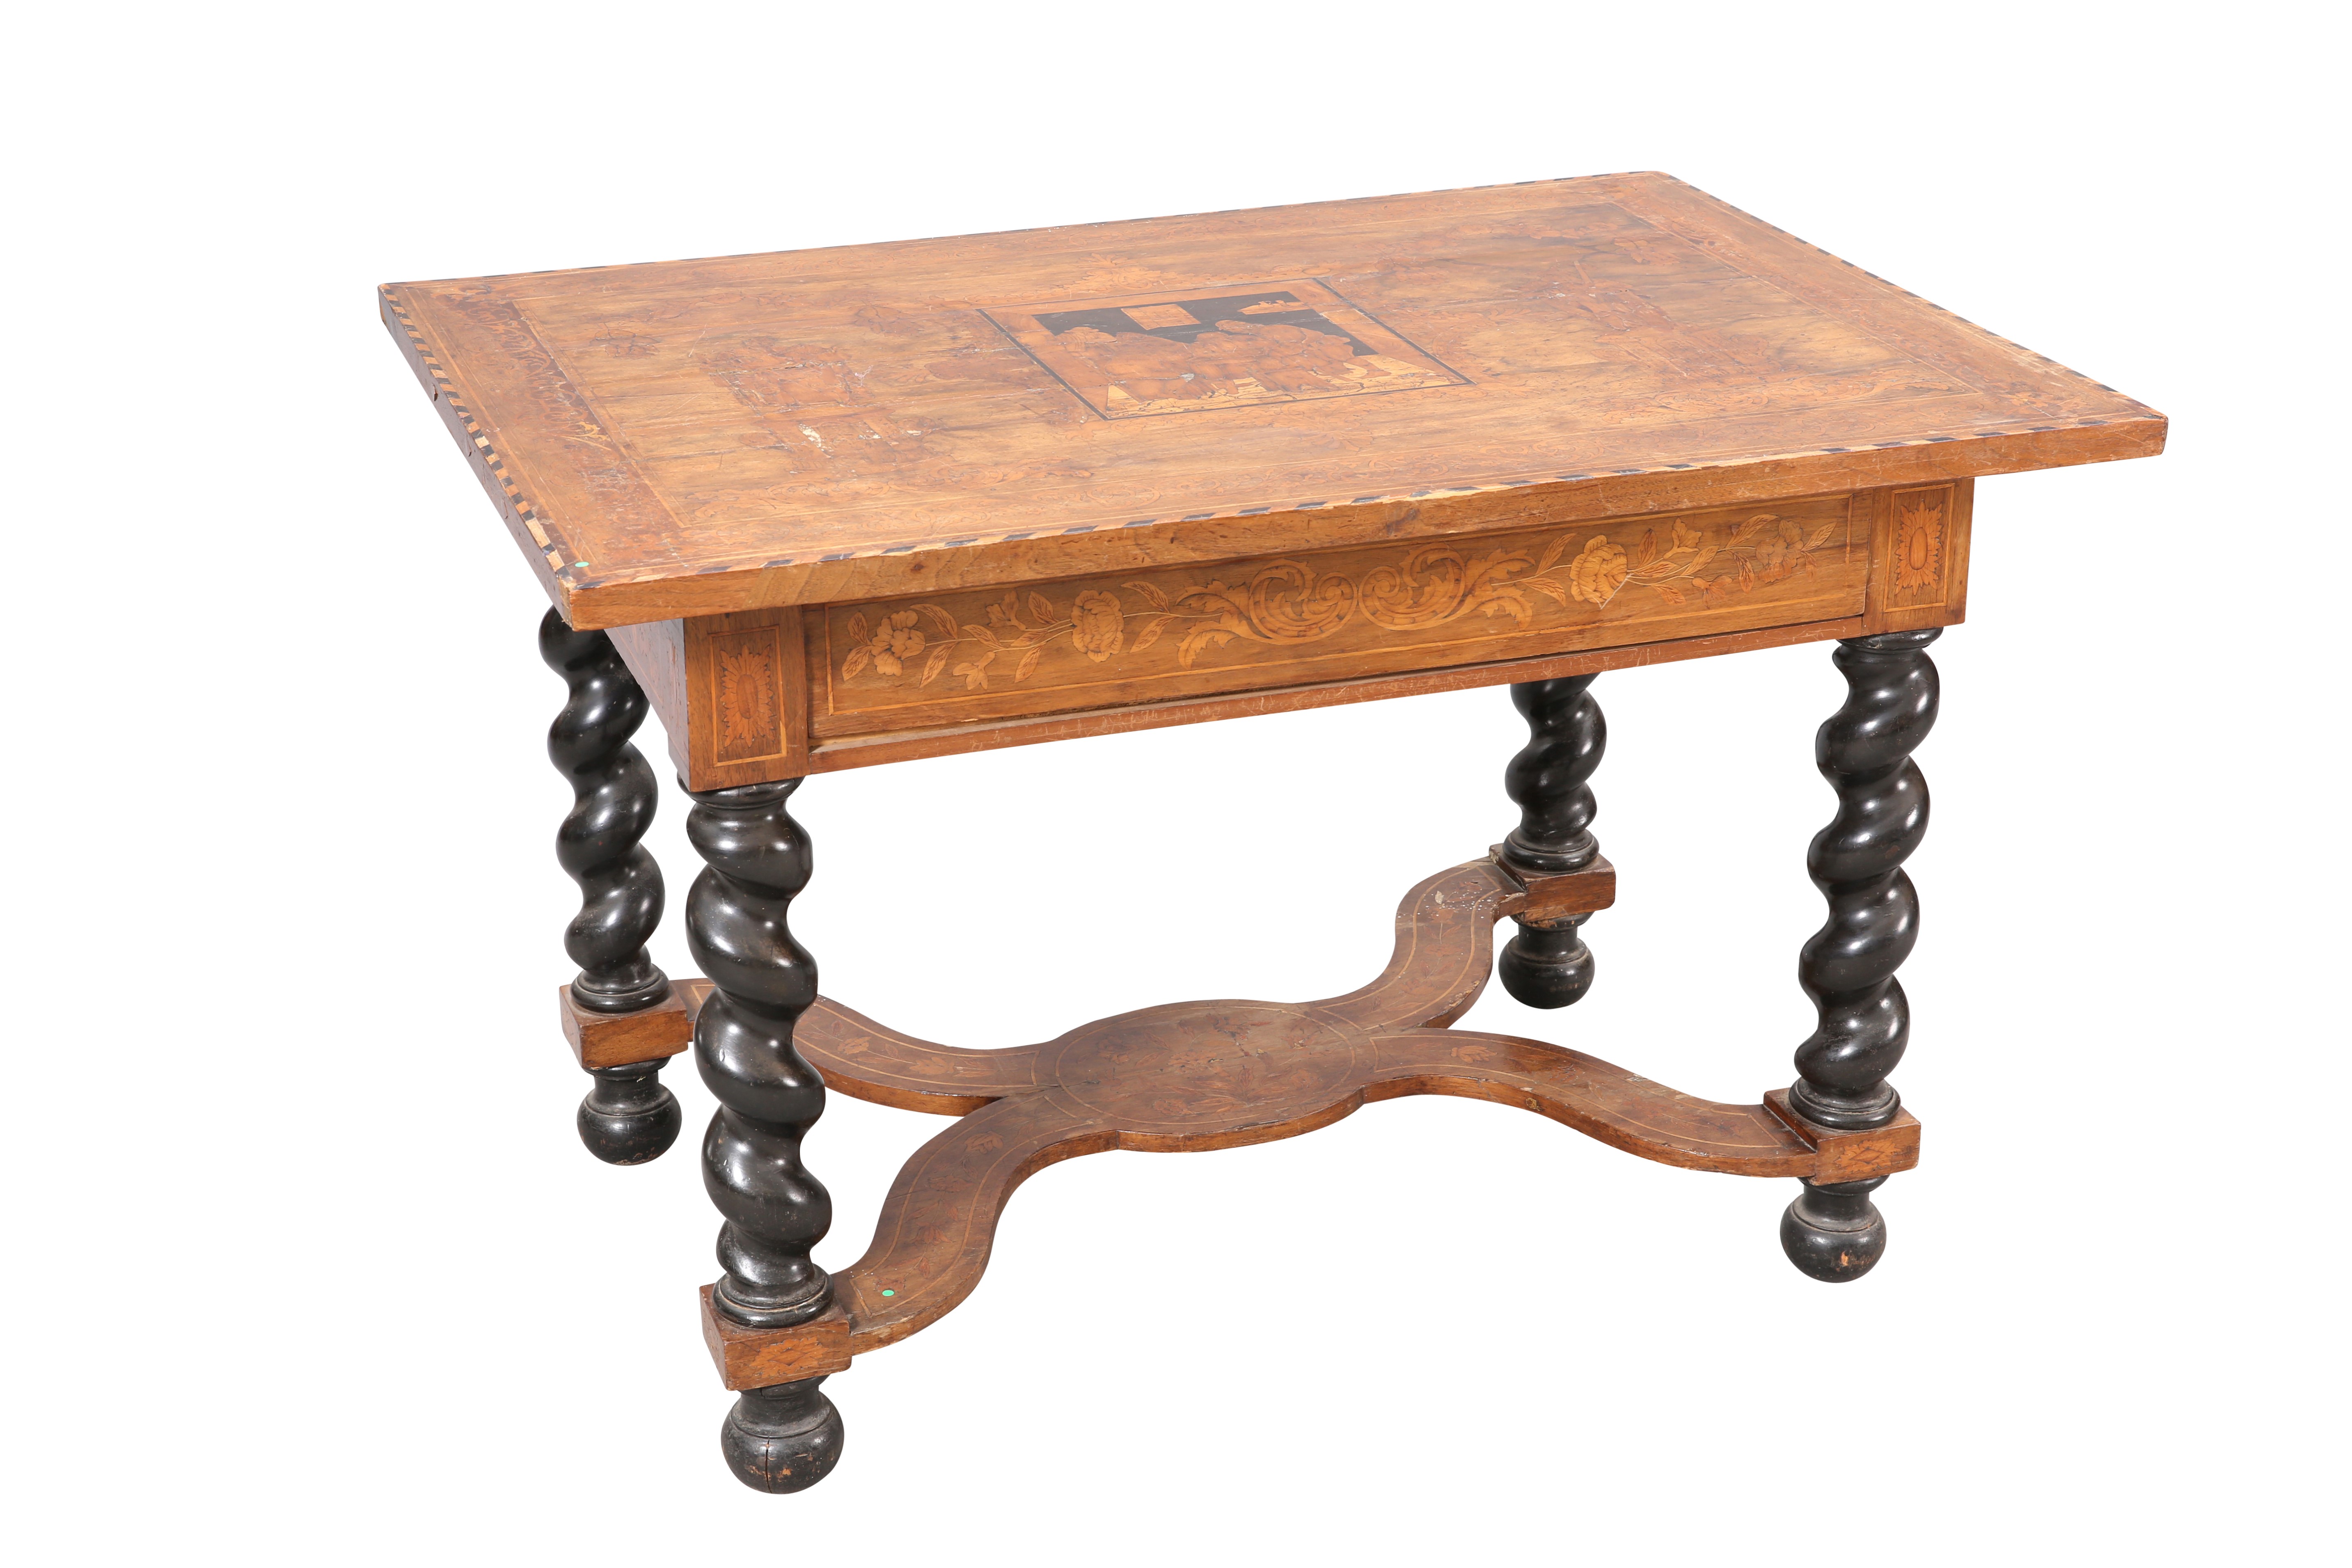 A DUTCH WALNUT, MARQUETRY AND EBONISED SIDE TABLE